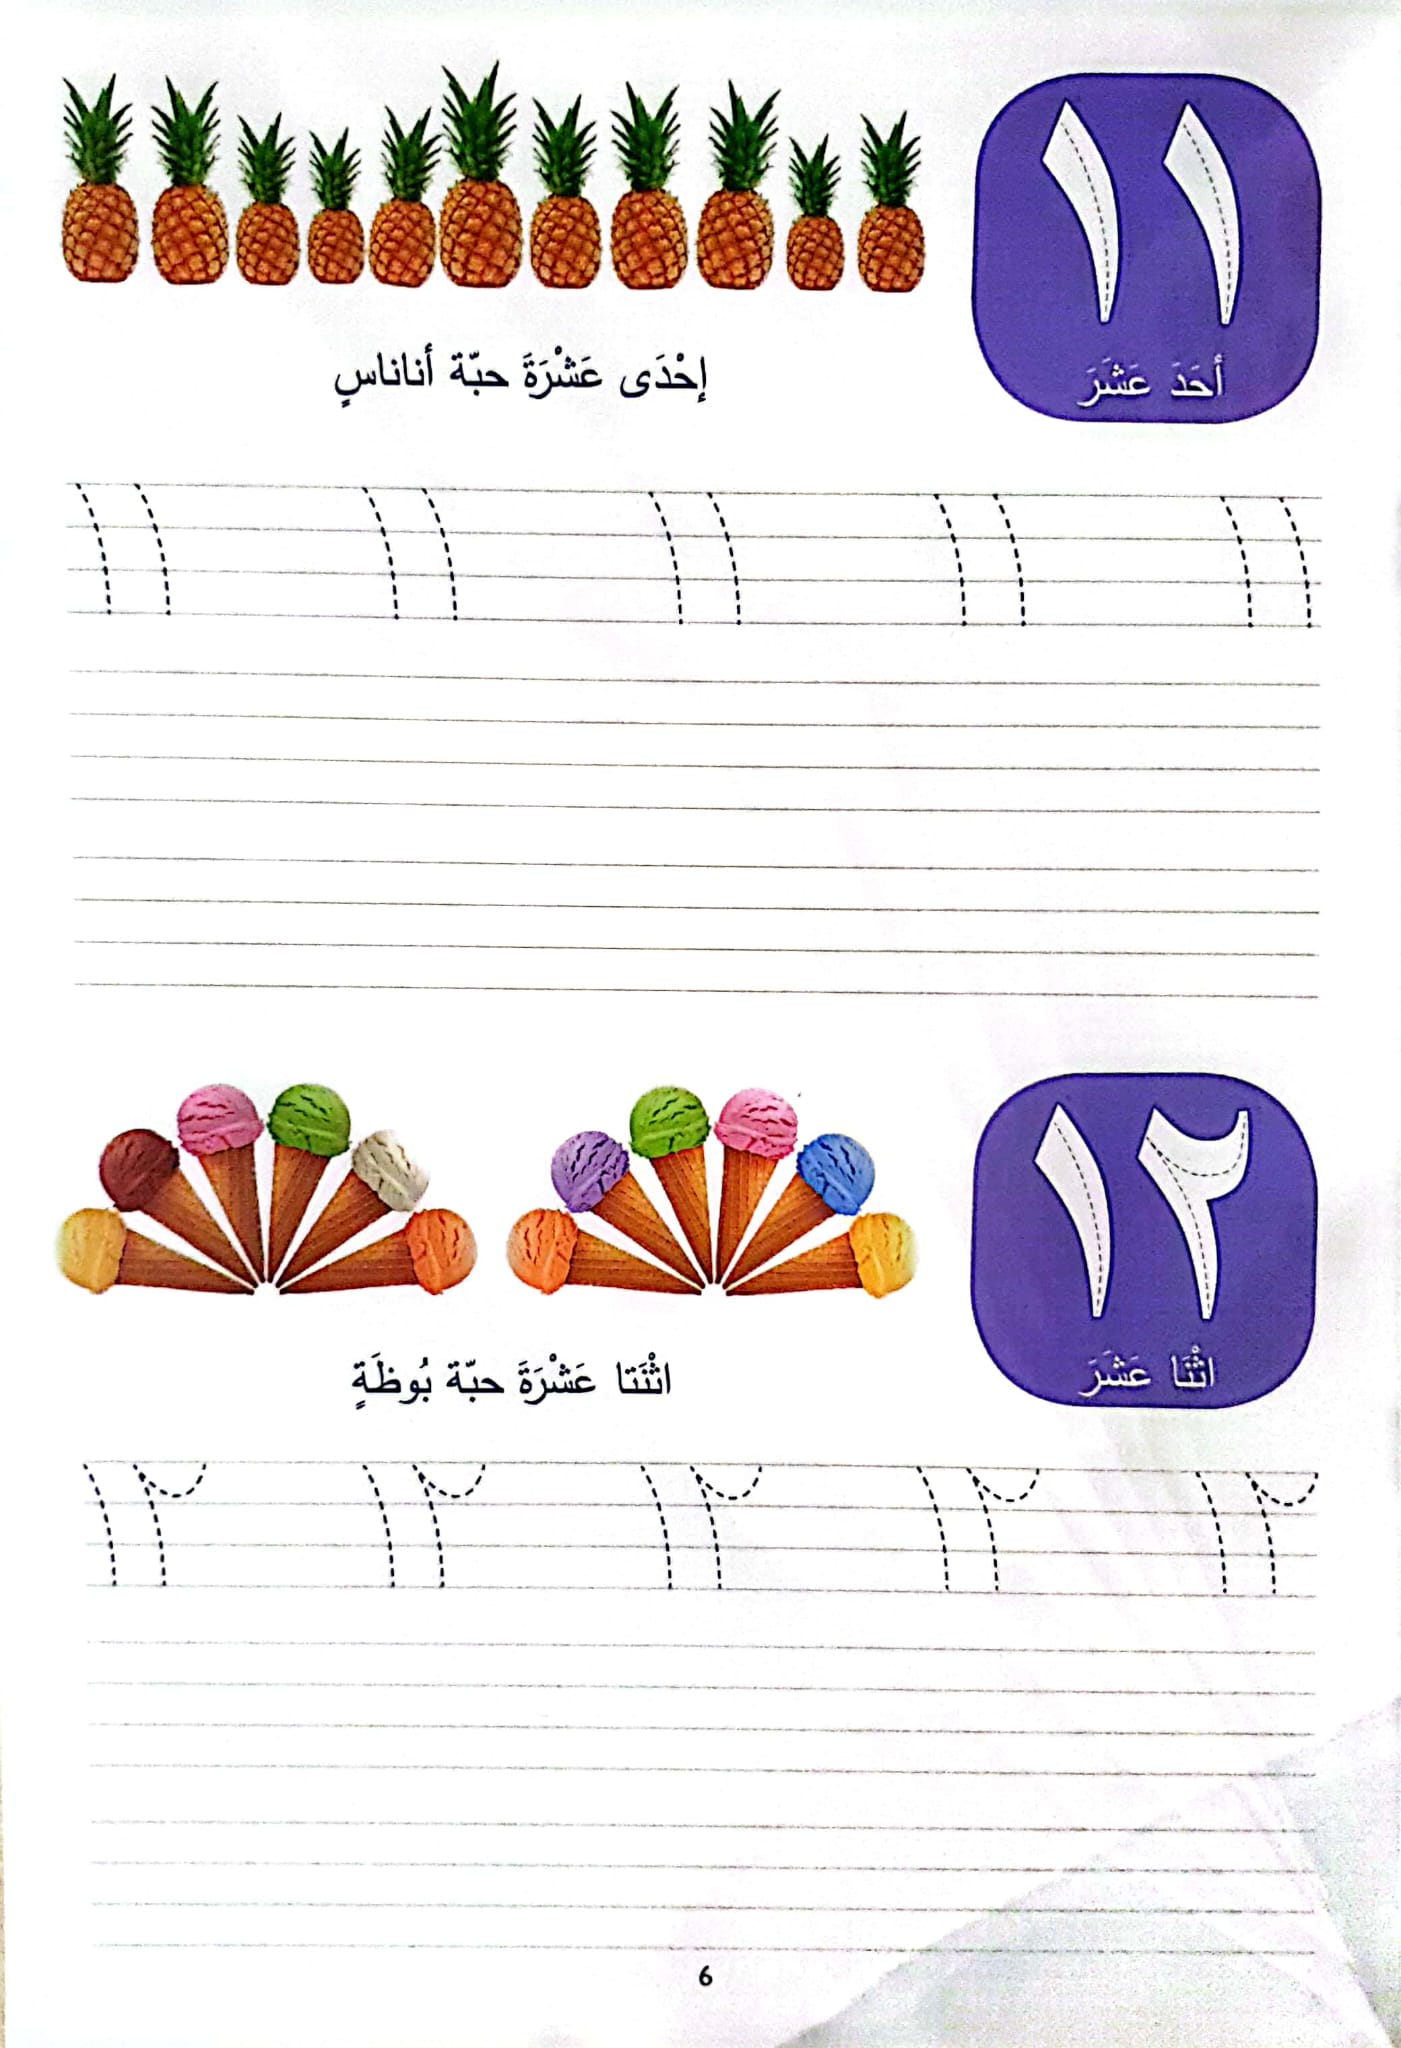 Fun with Arabic Numbers W/C (A3)